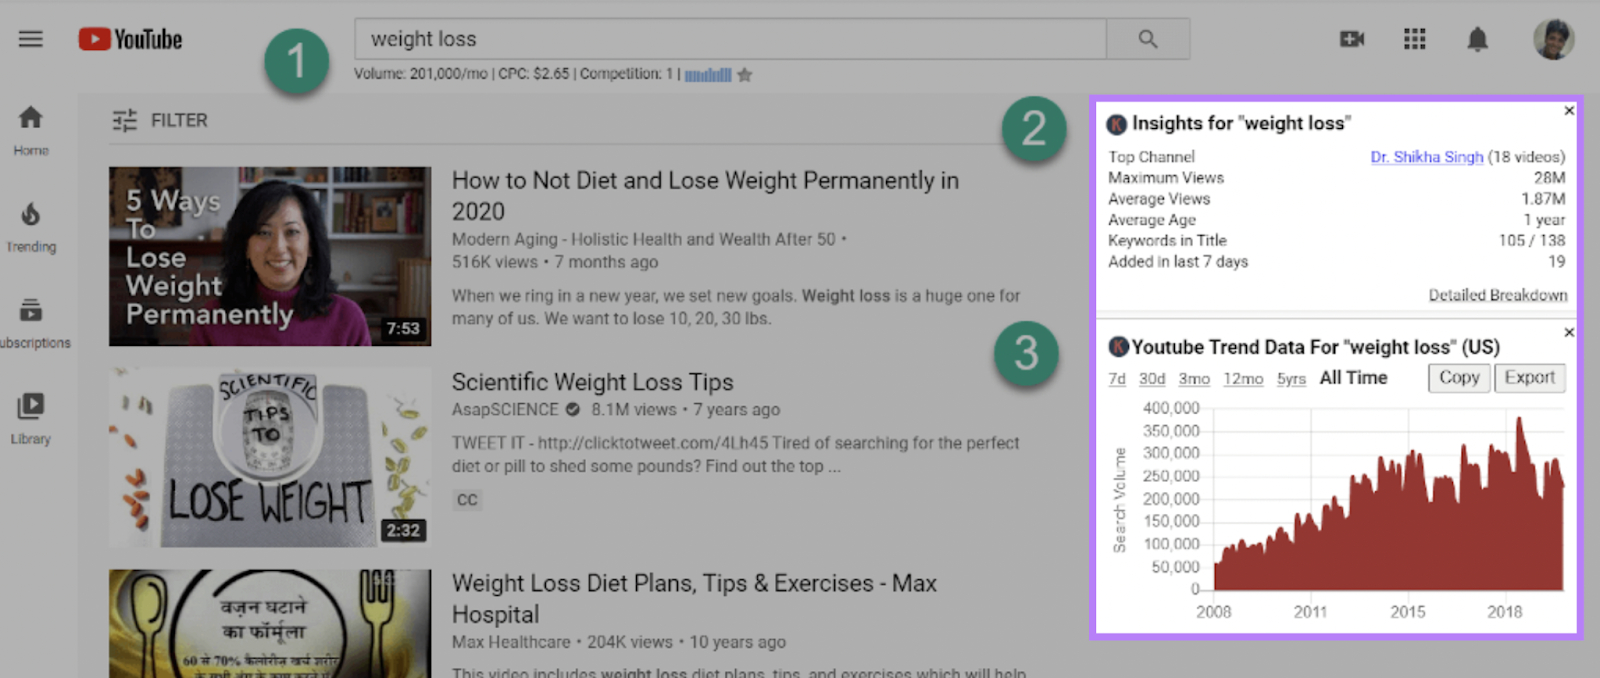 Keywords Everywhere extension widget with metrics shown on YouTube